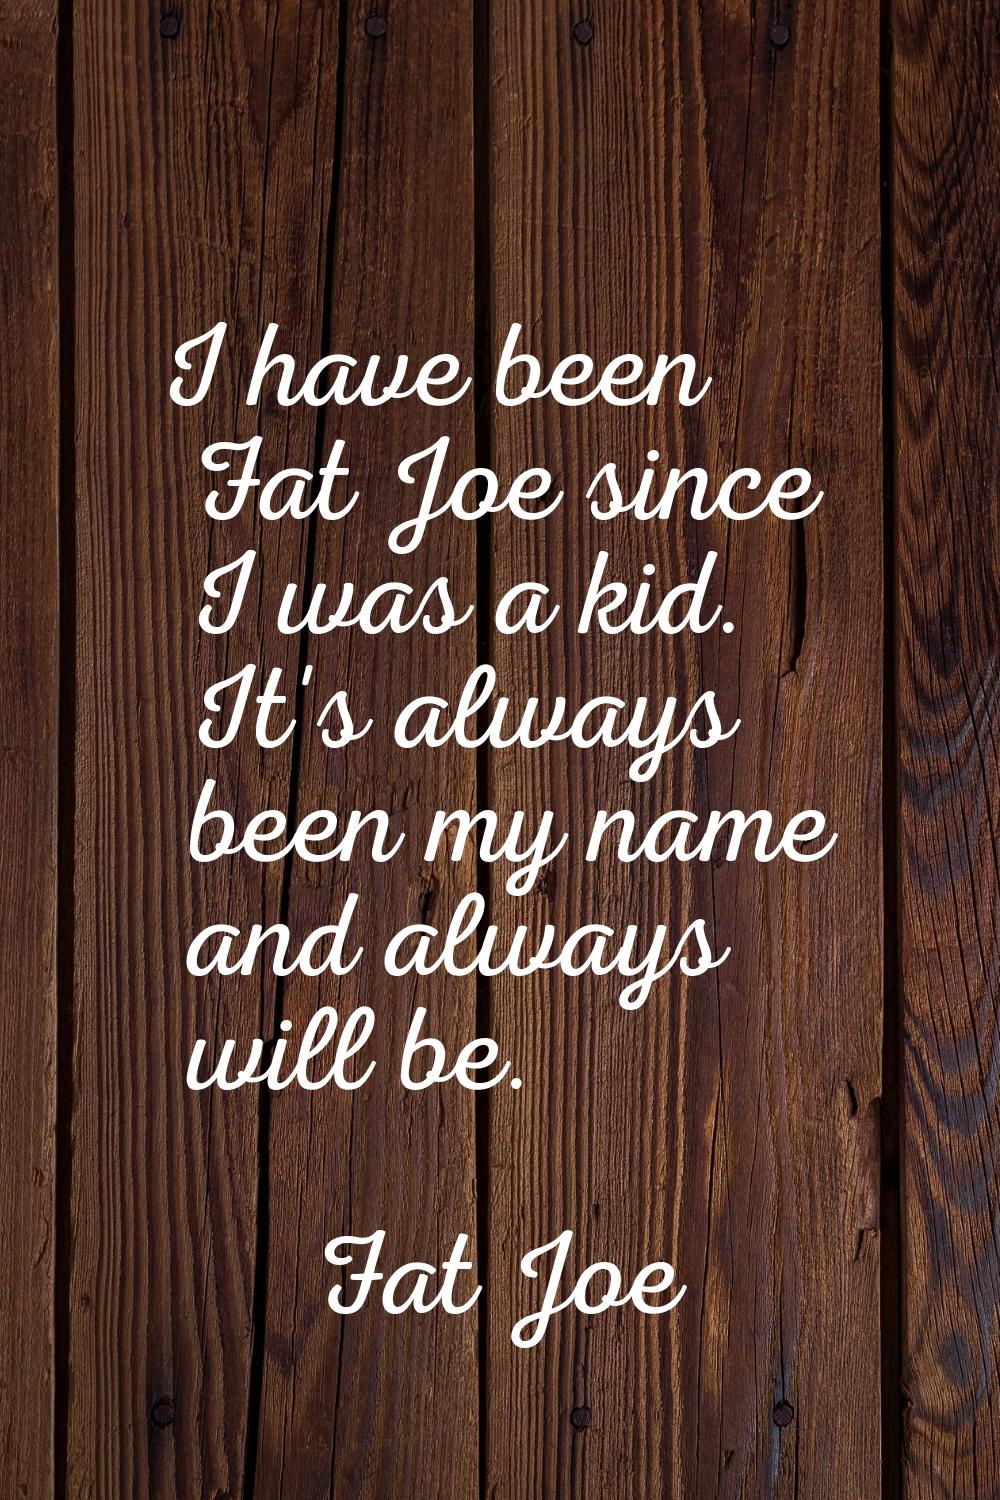 I have been Fat Joe since I was a kid. It's always been my name and always will be.